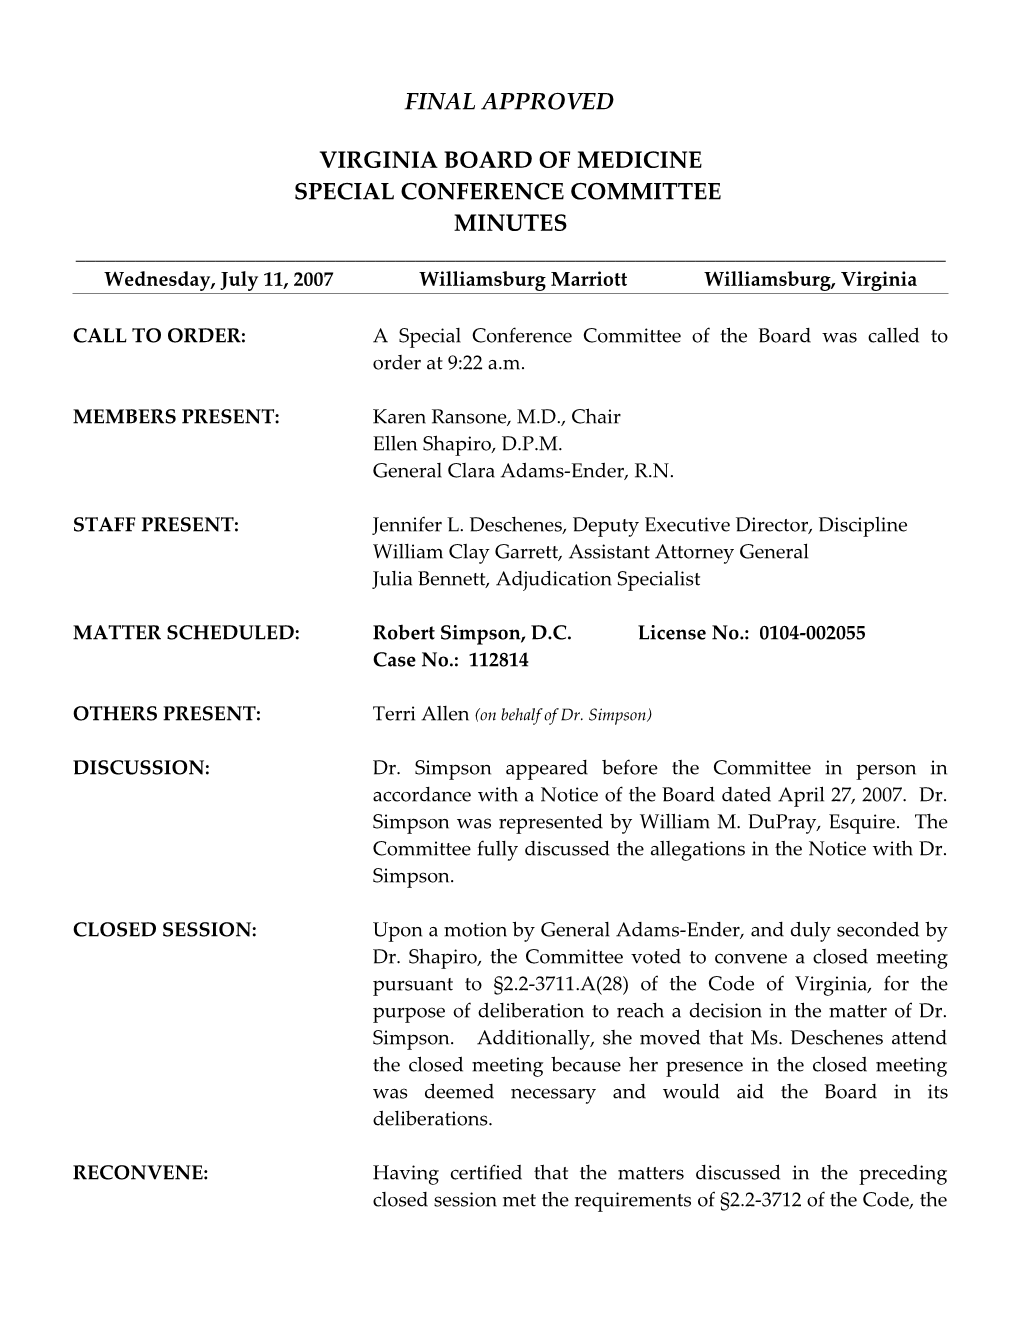 FINAL APPROVED Minutes of July 11, 2007 Special Conference Committee